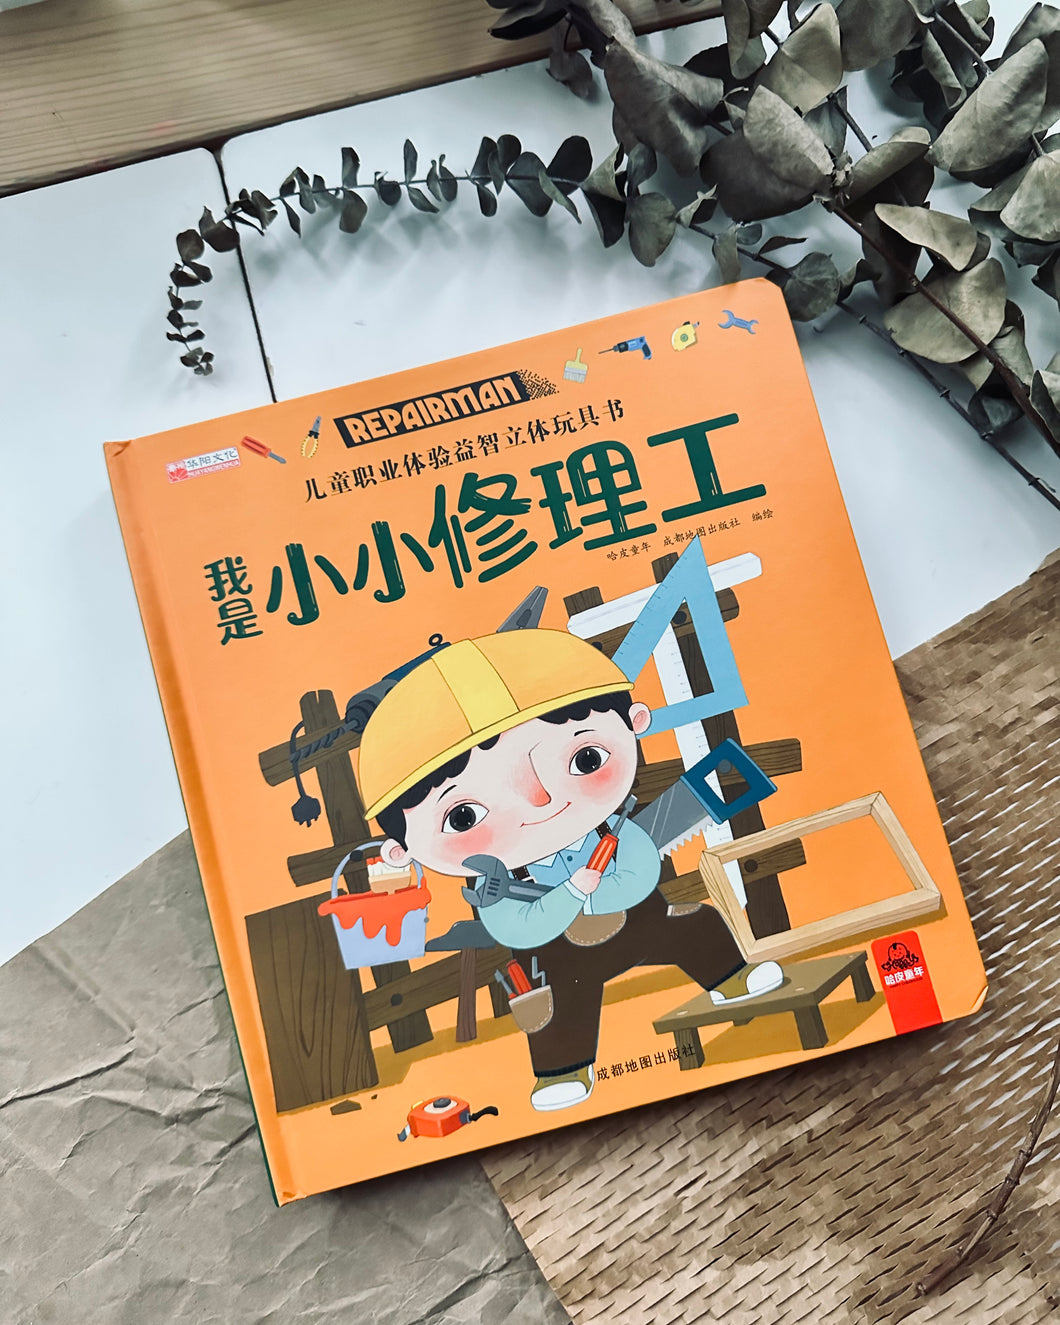 Little Occupation Play books in Chinese [儿童职业体验立体玩具书 ]